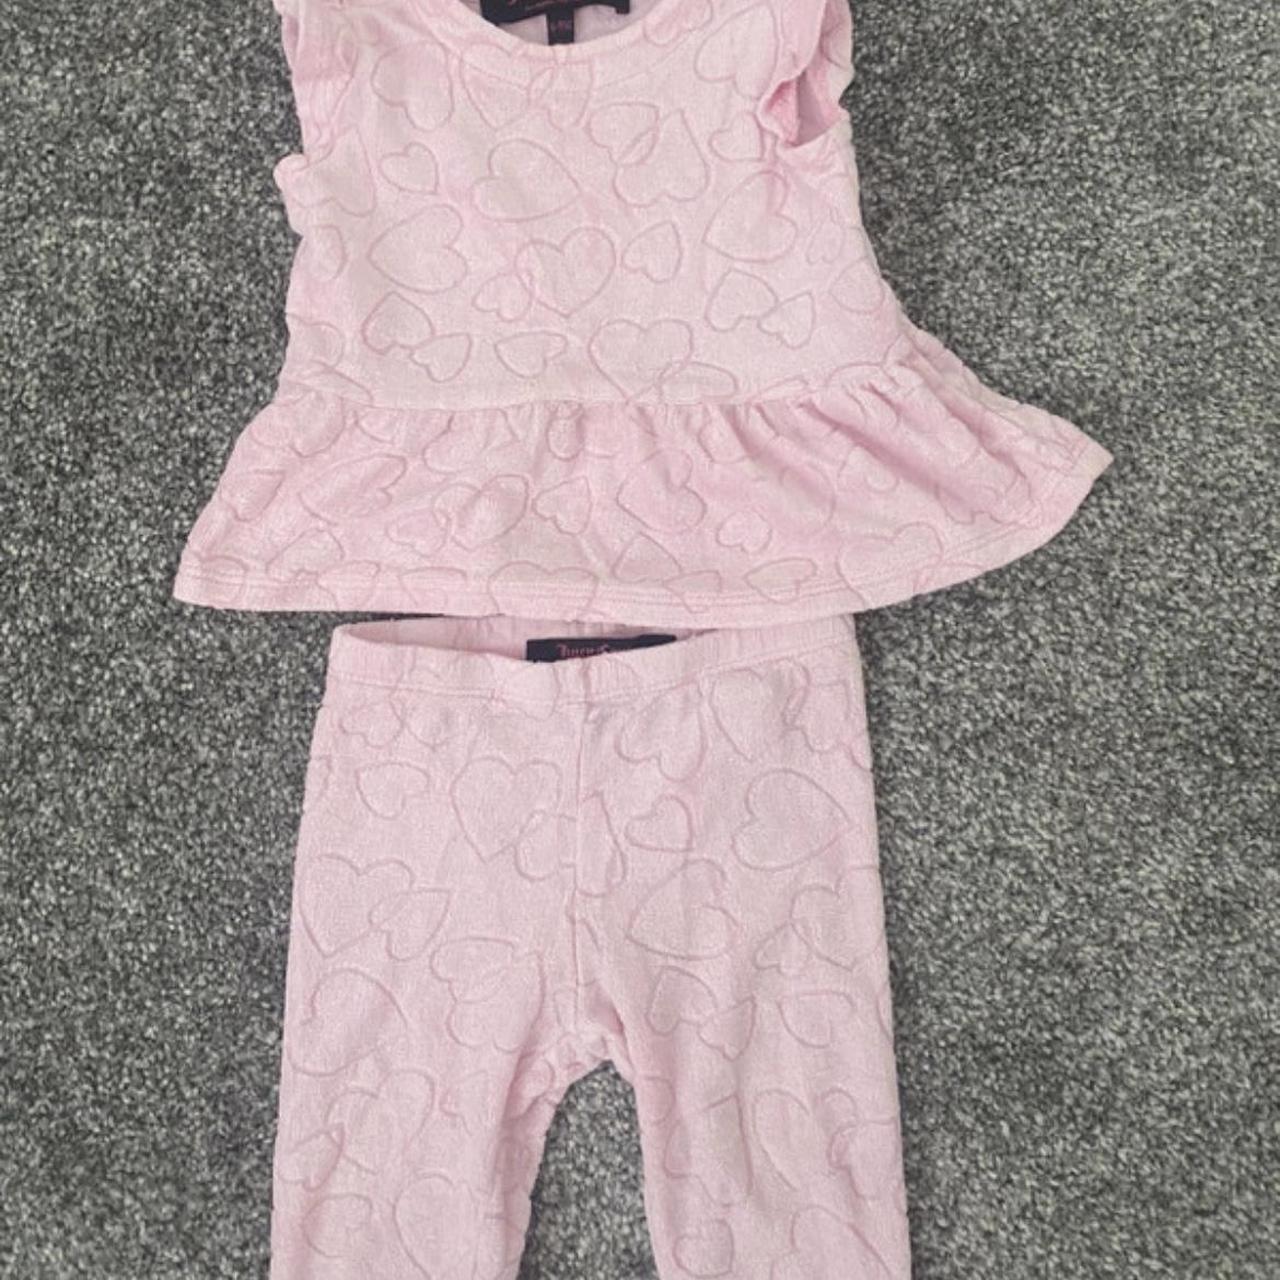 Juicy couture set 6/9 months worn a handful of times - Depop